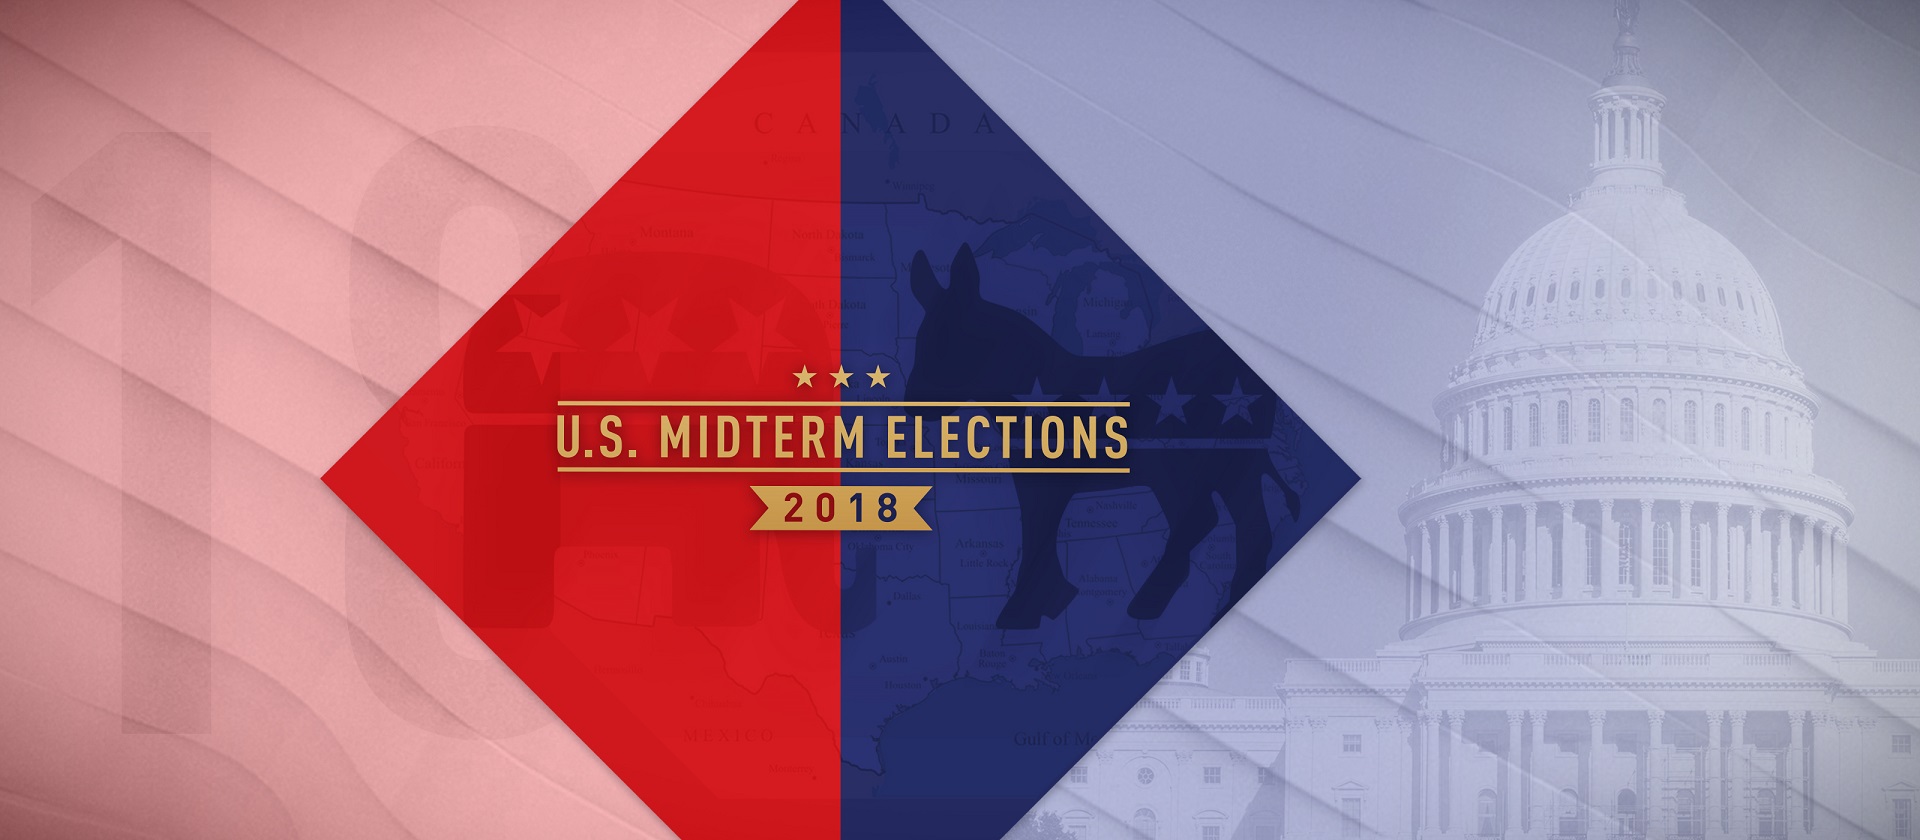 The Heat: US Midterm election results